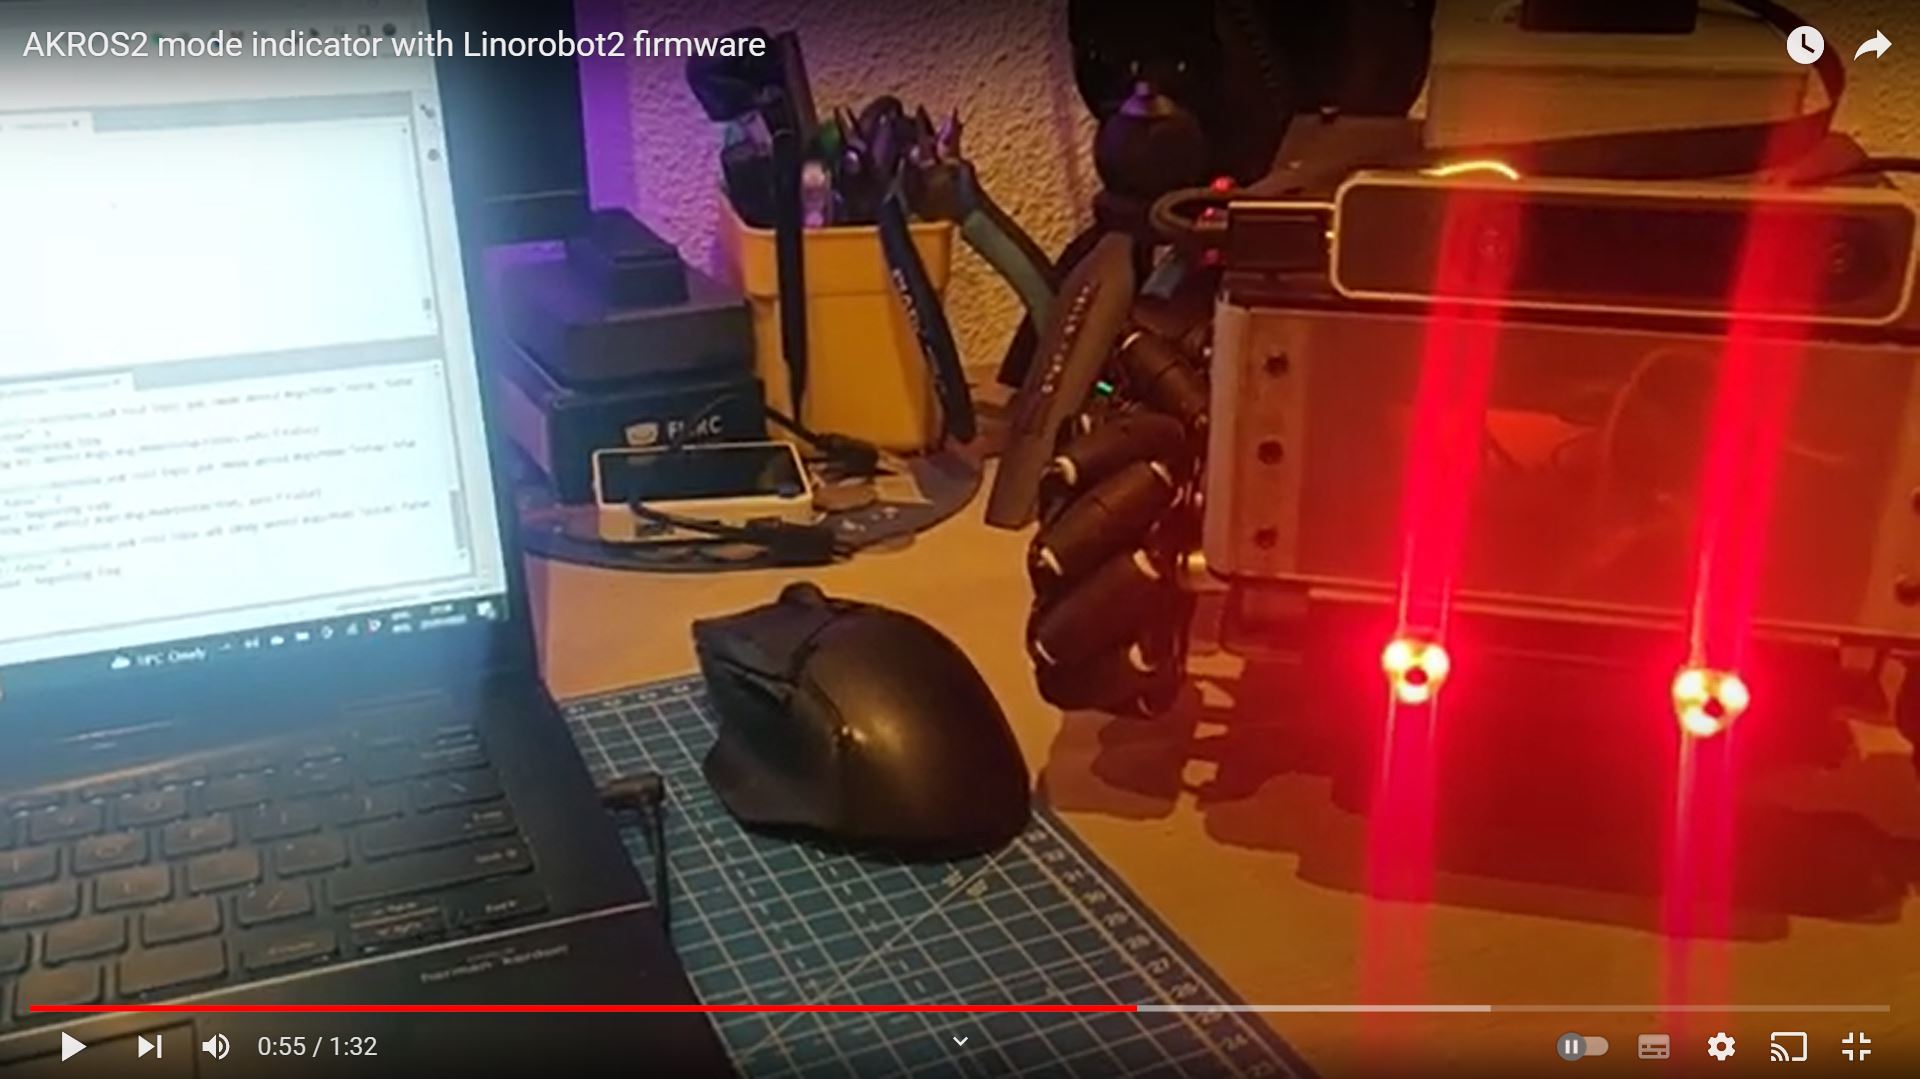 AKROS2 mode indicator with Linorobot2 firmware